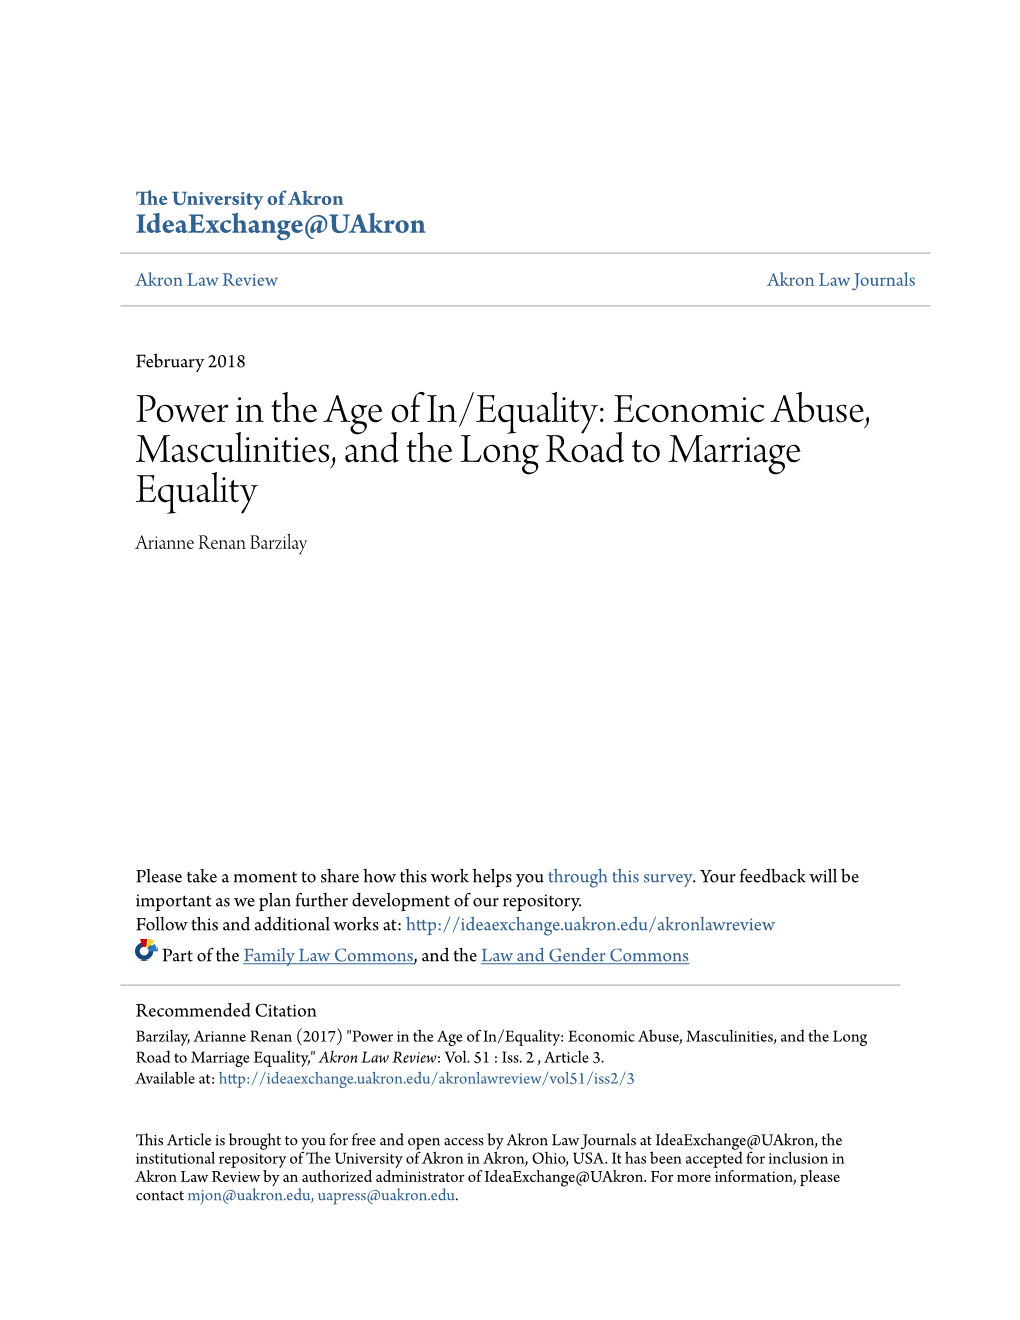 Power in the Age of In/Equality: Economic Abuse, Masculinities, and the Long Road to Marriage Equality Arianne Renan Barzilay